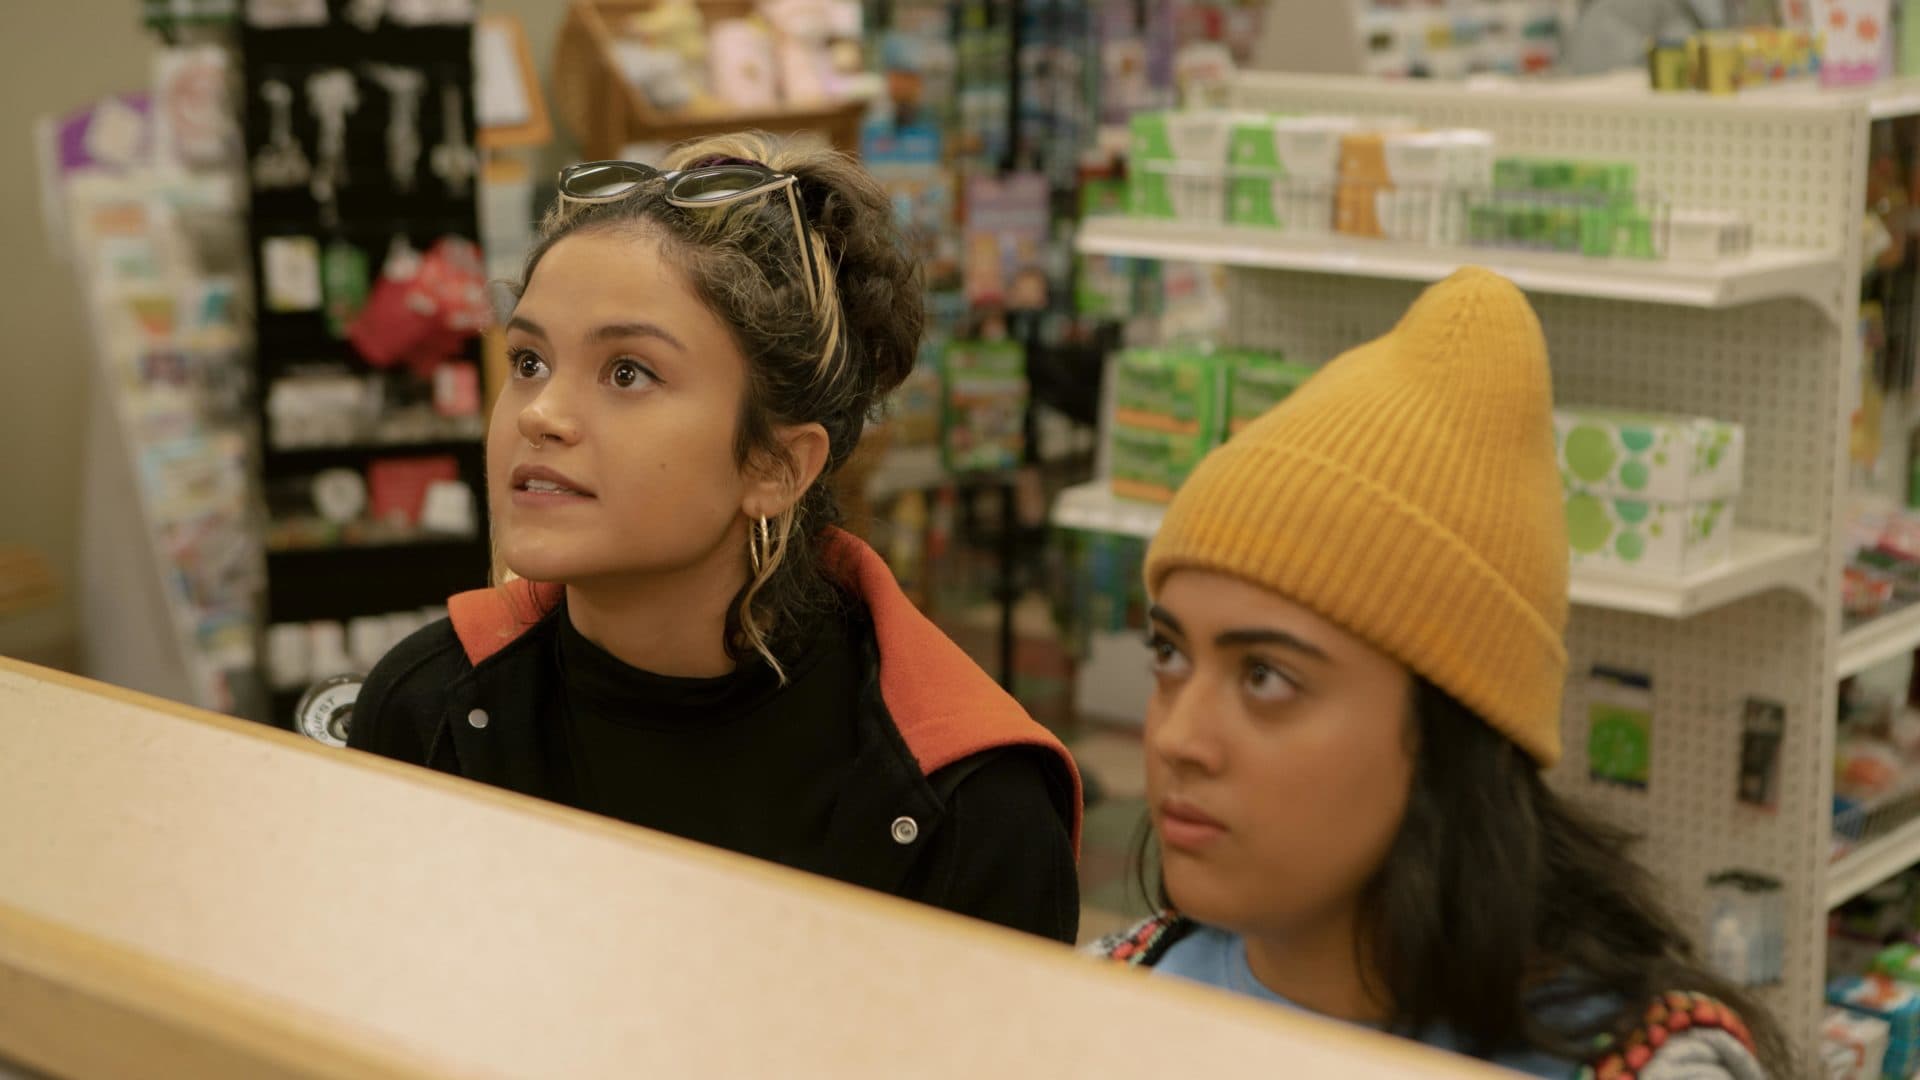 Left to right, Victoria Moroles as Lupe and Kuhoo Verma as Sunny in &quot;Plan B.&quot; (Courtesy Brett Roedel/Hulu)